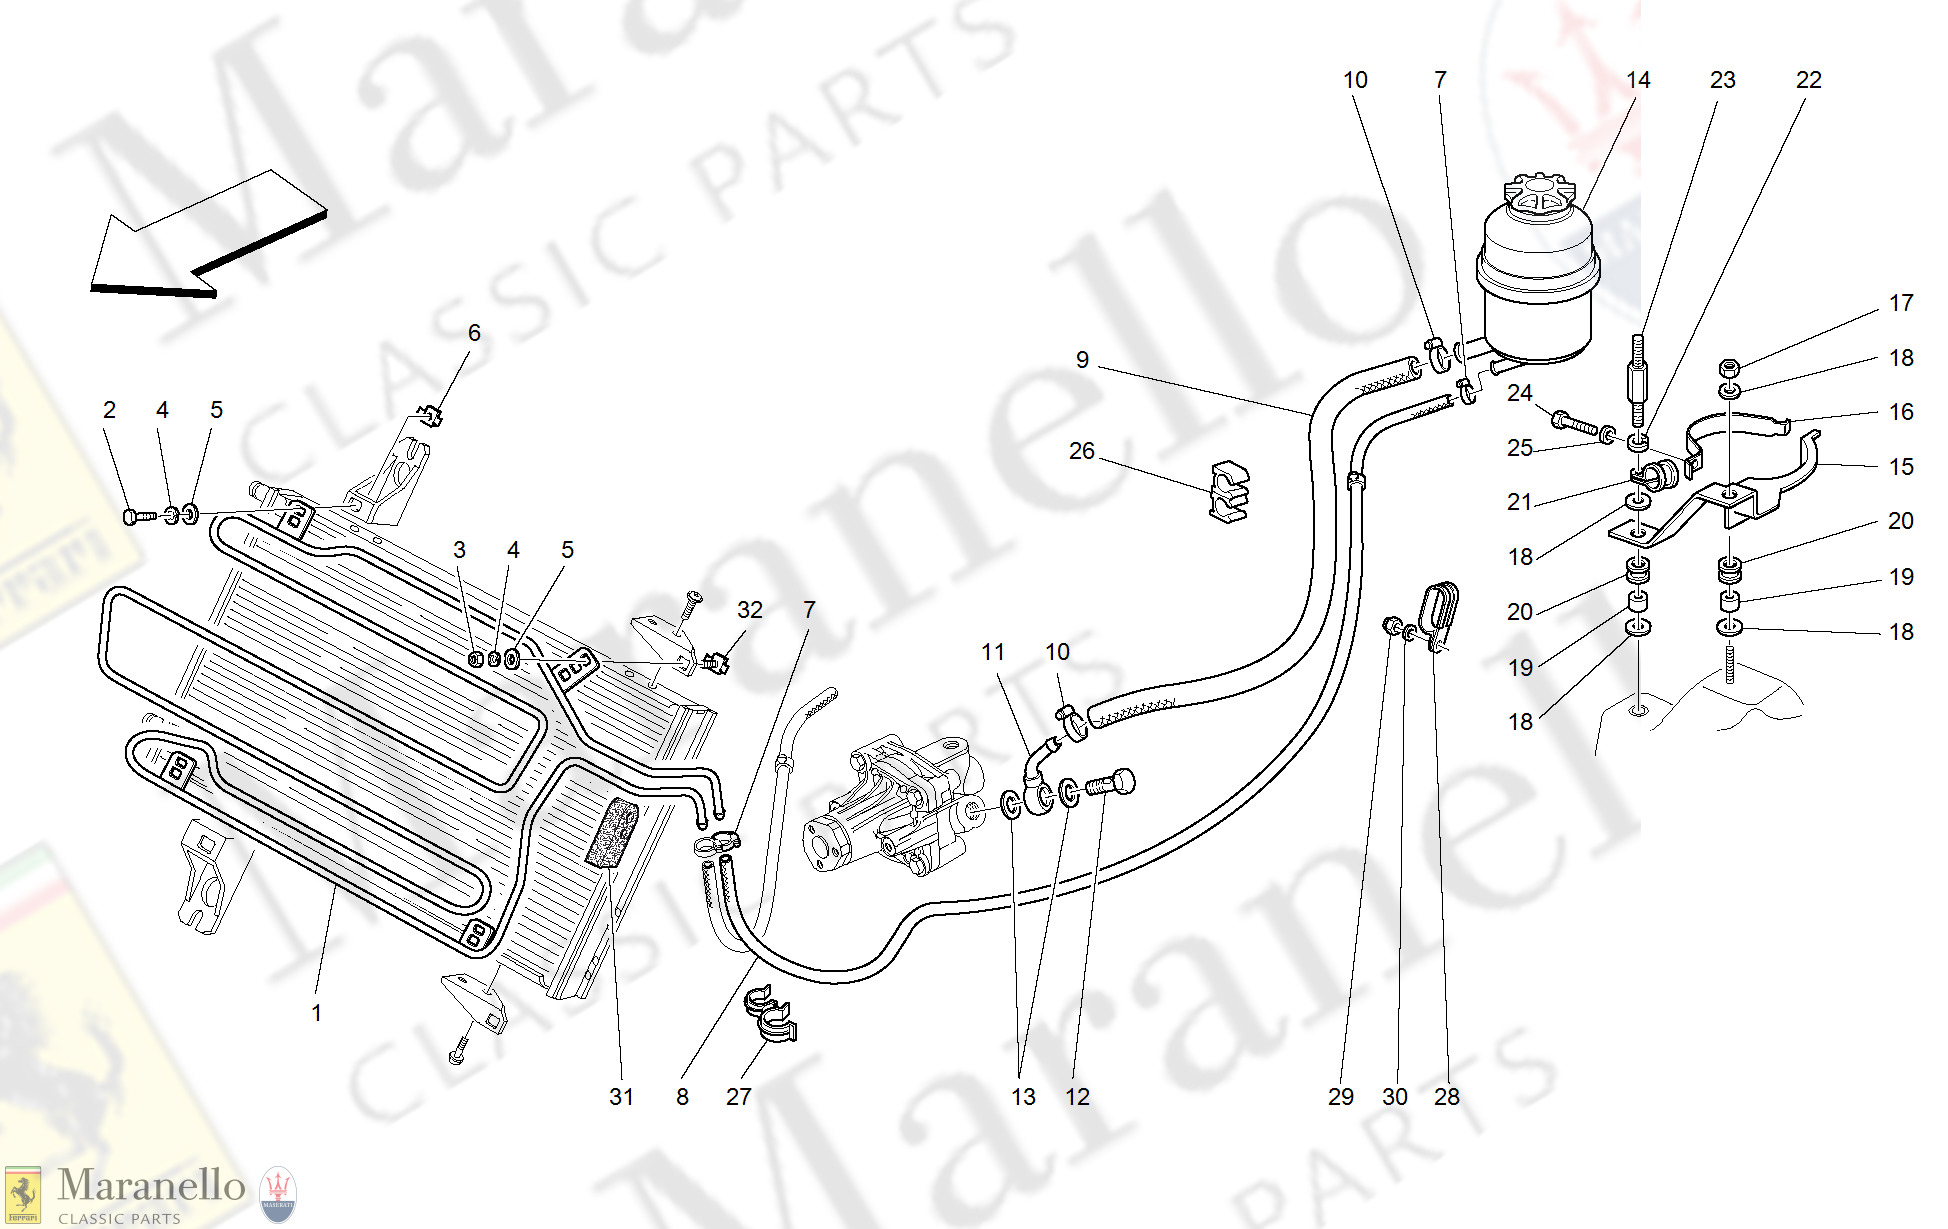 050 - Oil Tank For Servosteering And Serpentine